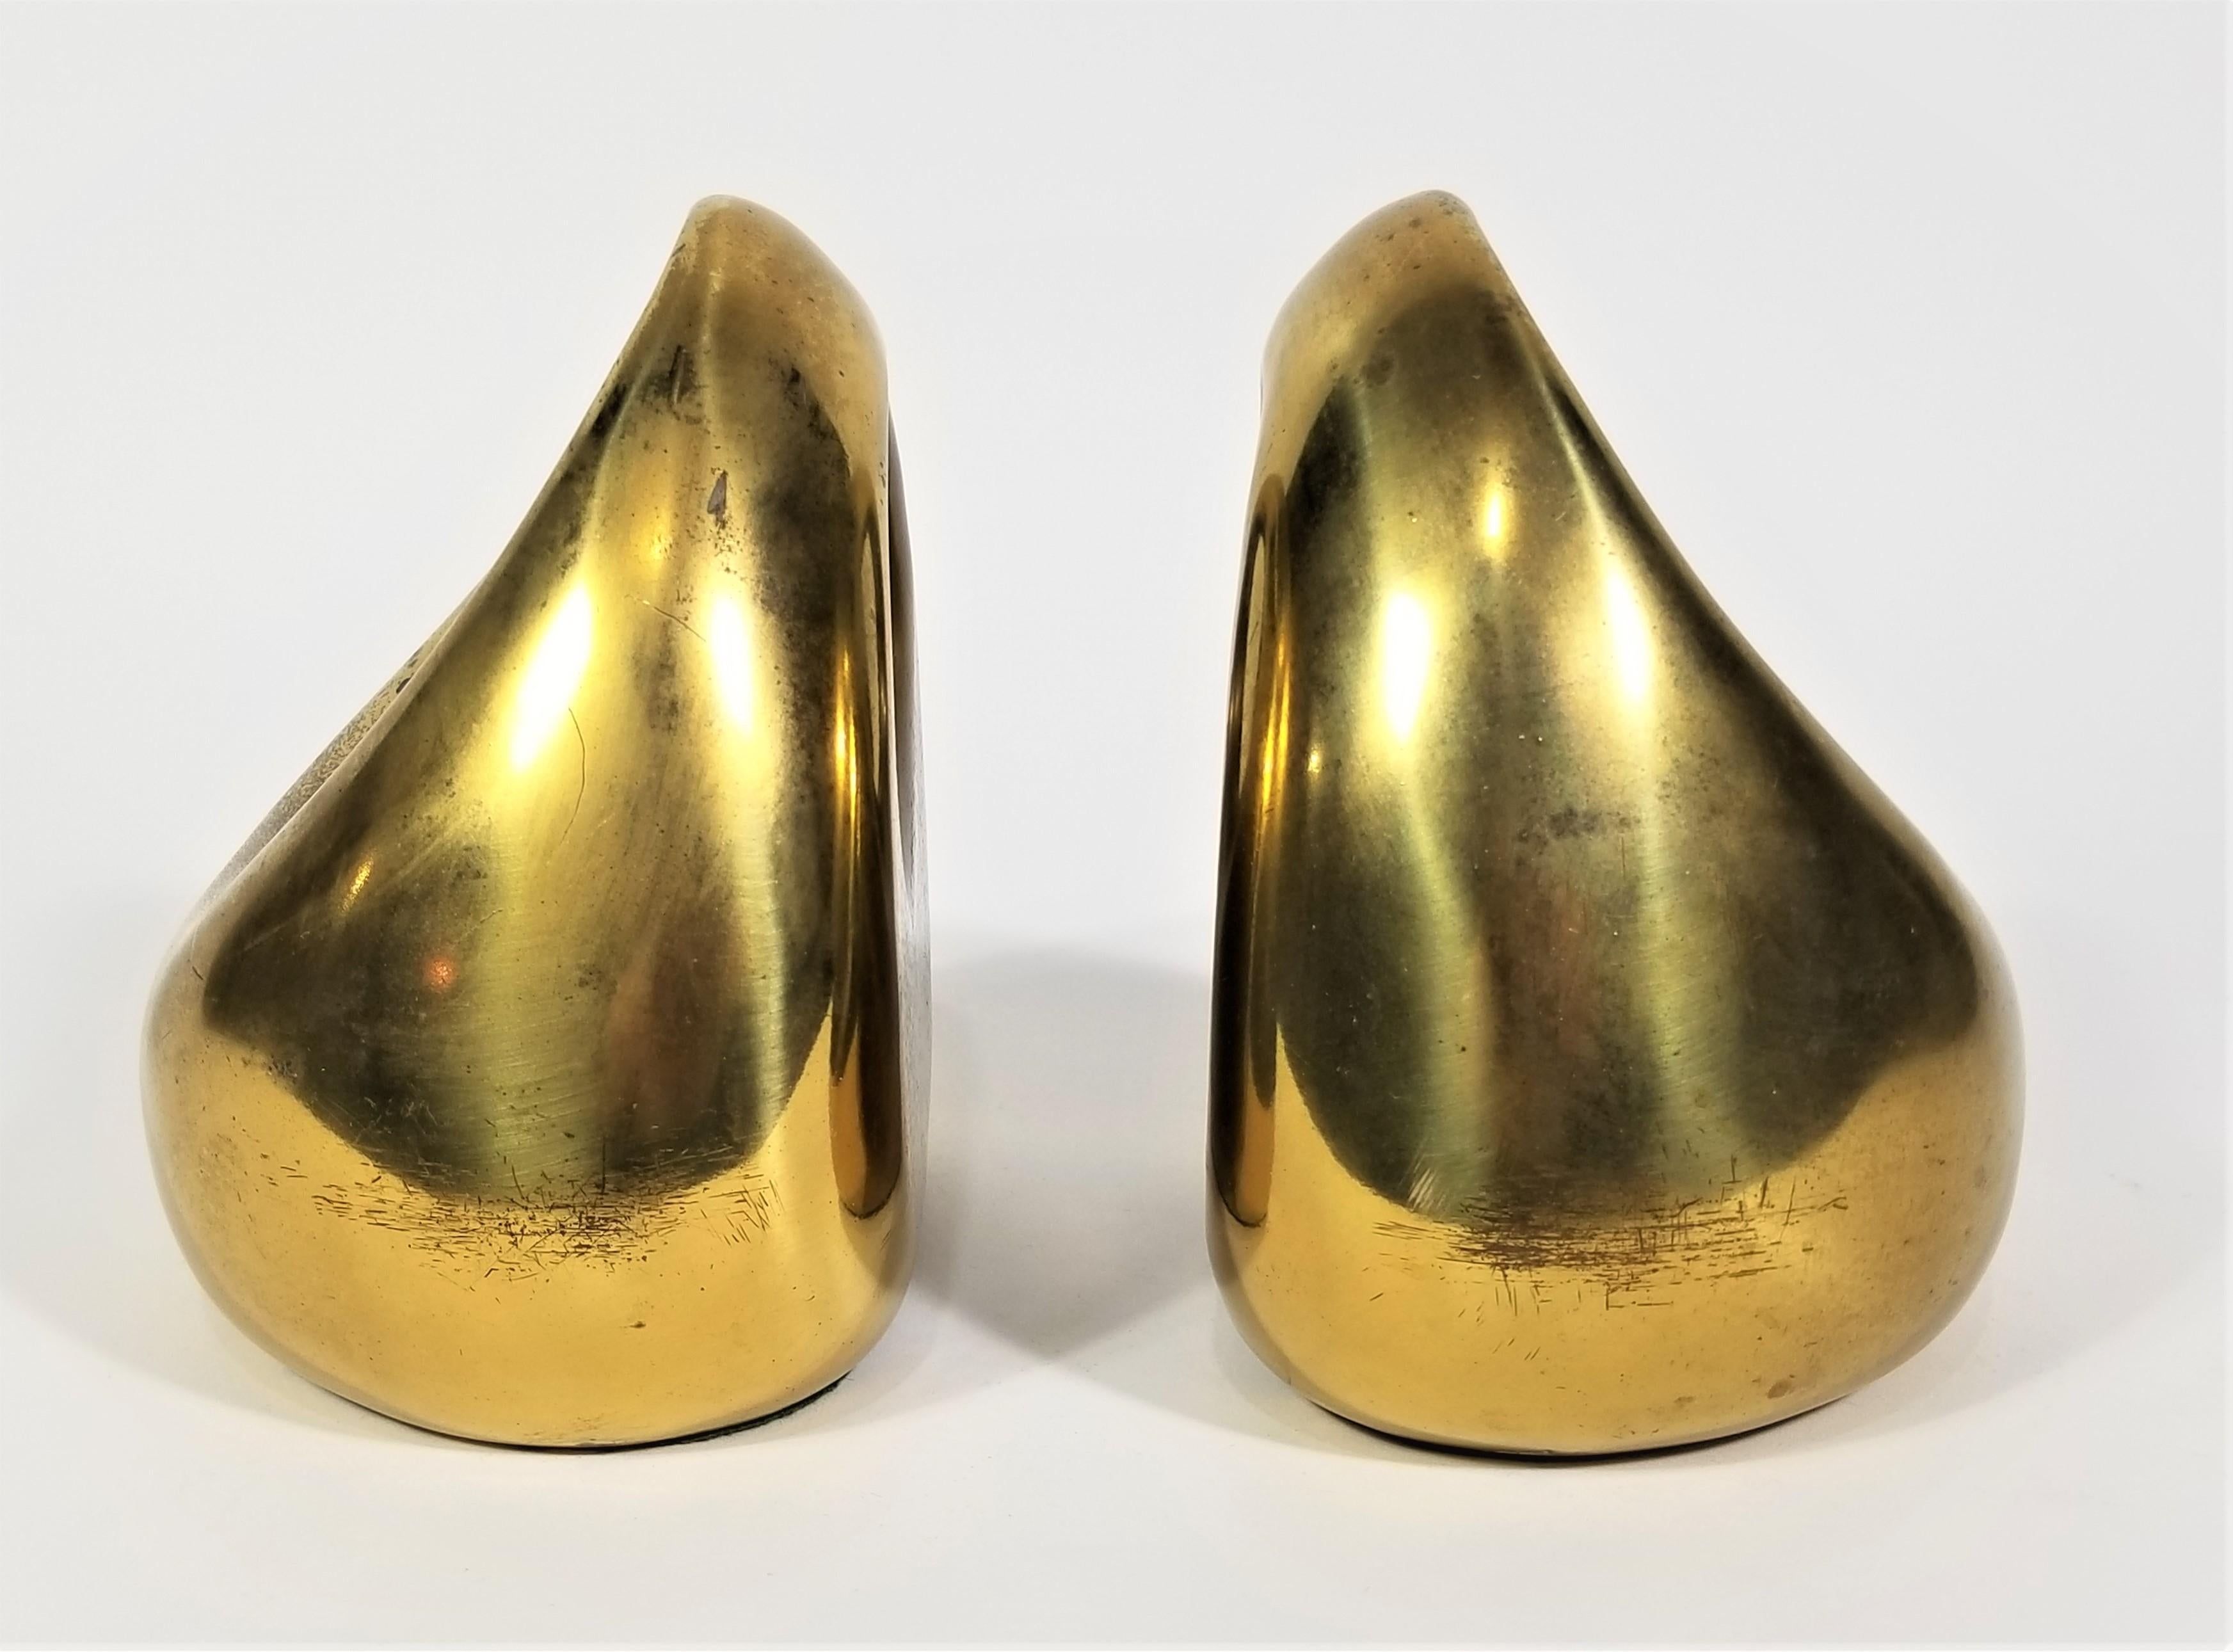 Mid Century 1960s Brass Bookend. Ben Seibel designed for Raymor. Still retains original marking sticker and felt bottom. Modern sculptural design. Some wear to finish consistent with age as shown in photos.